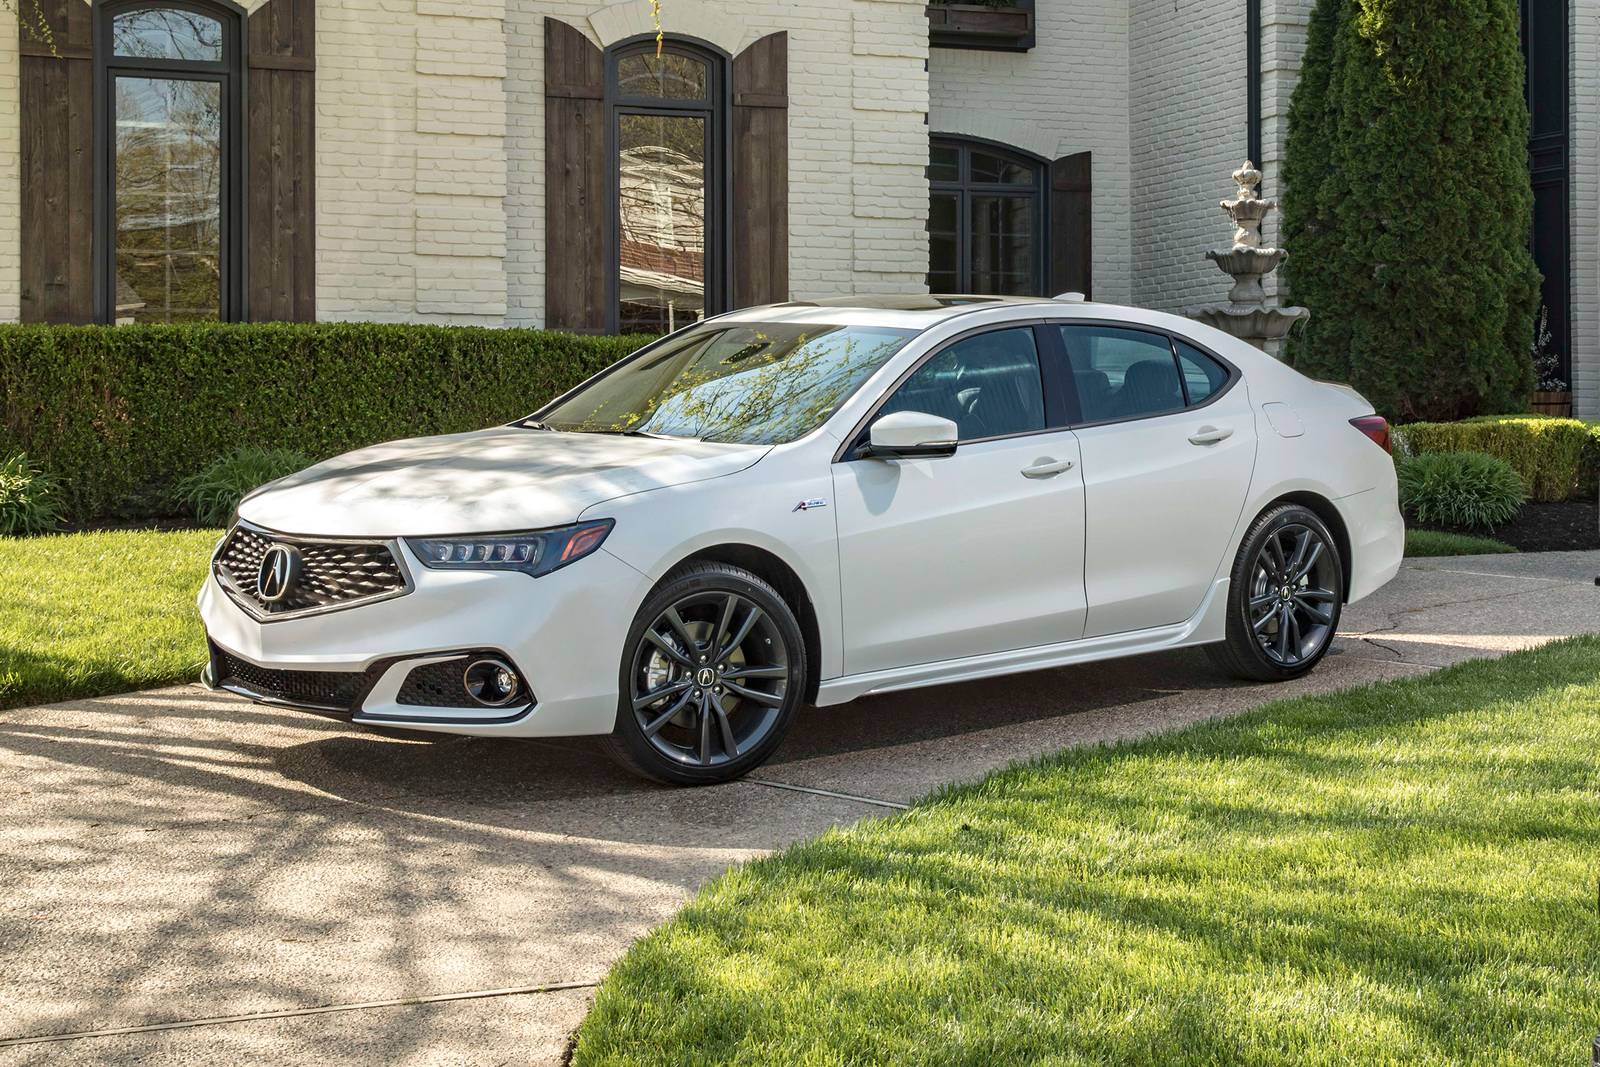 2018 Acura TLX Review & Ratings | Edmunds